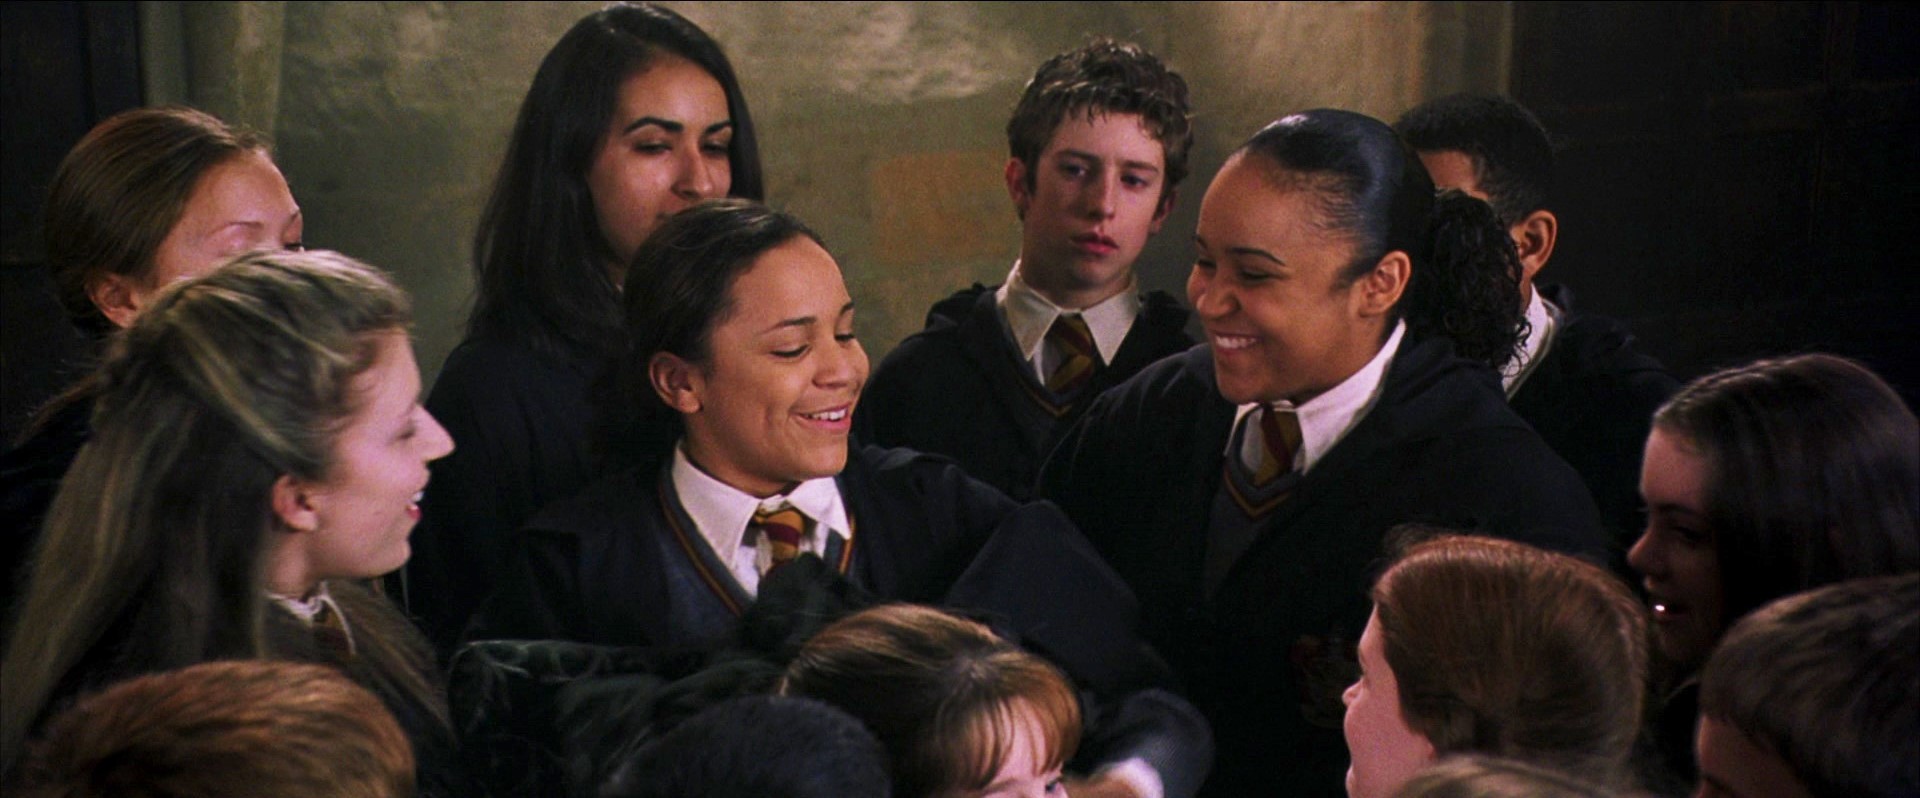 Who portrayed Alicia Spinnet in the Harry Potter movies? 2